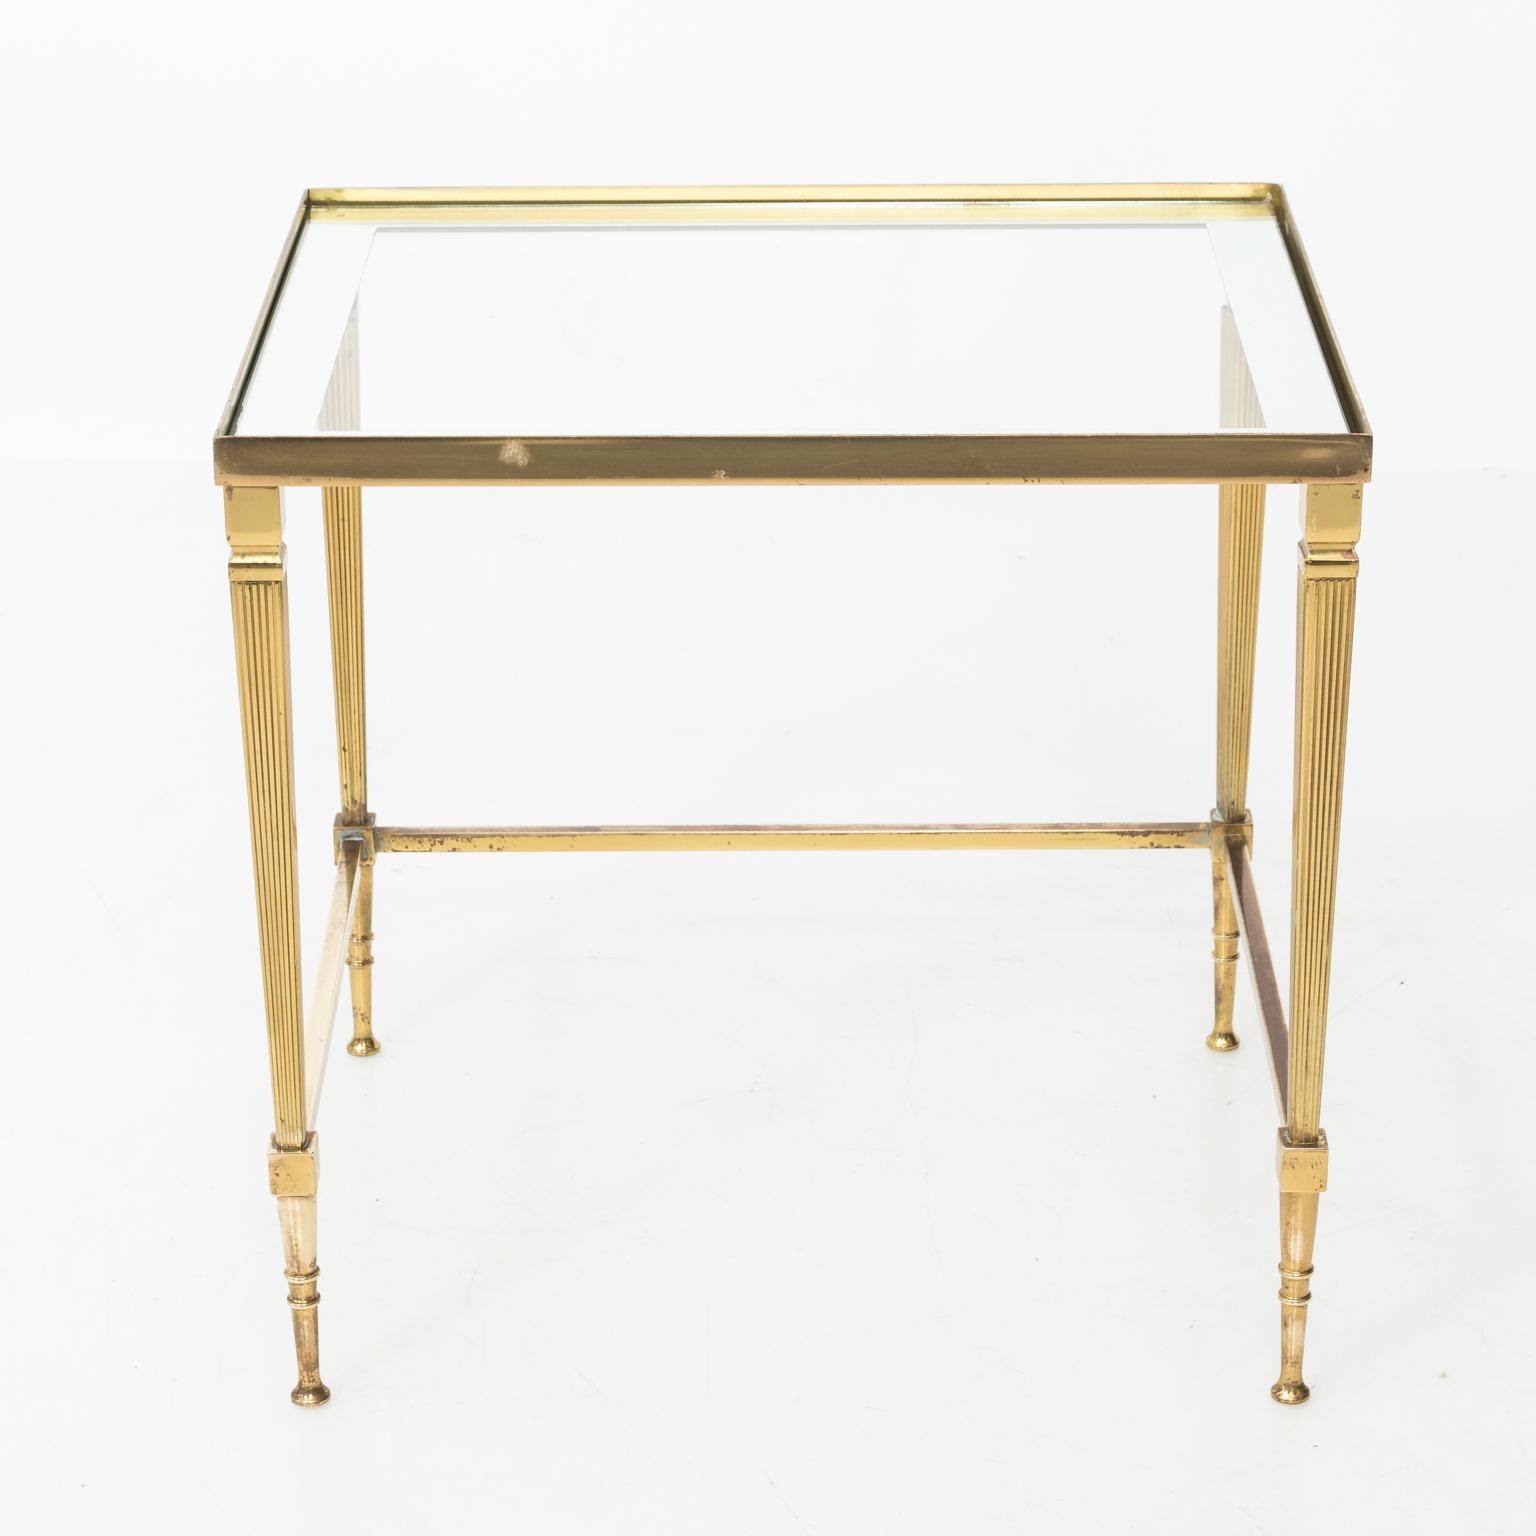 Set of three brass nesting tables with fitted glass tops that have mirrored borders surrounding glass. Dimensions listed are for the largest table, circa 1970s. Some discoloration to brass. Some wear to glass at two corners.